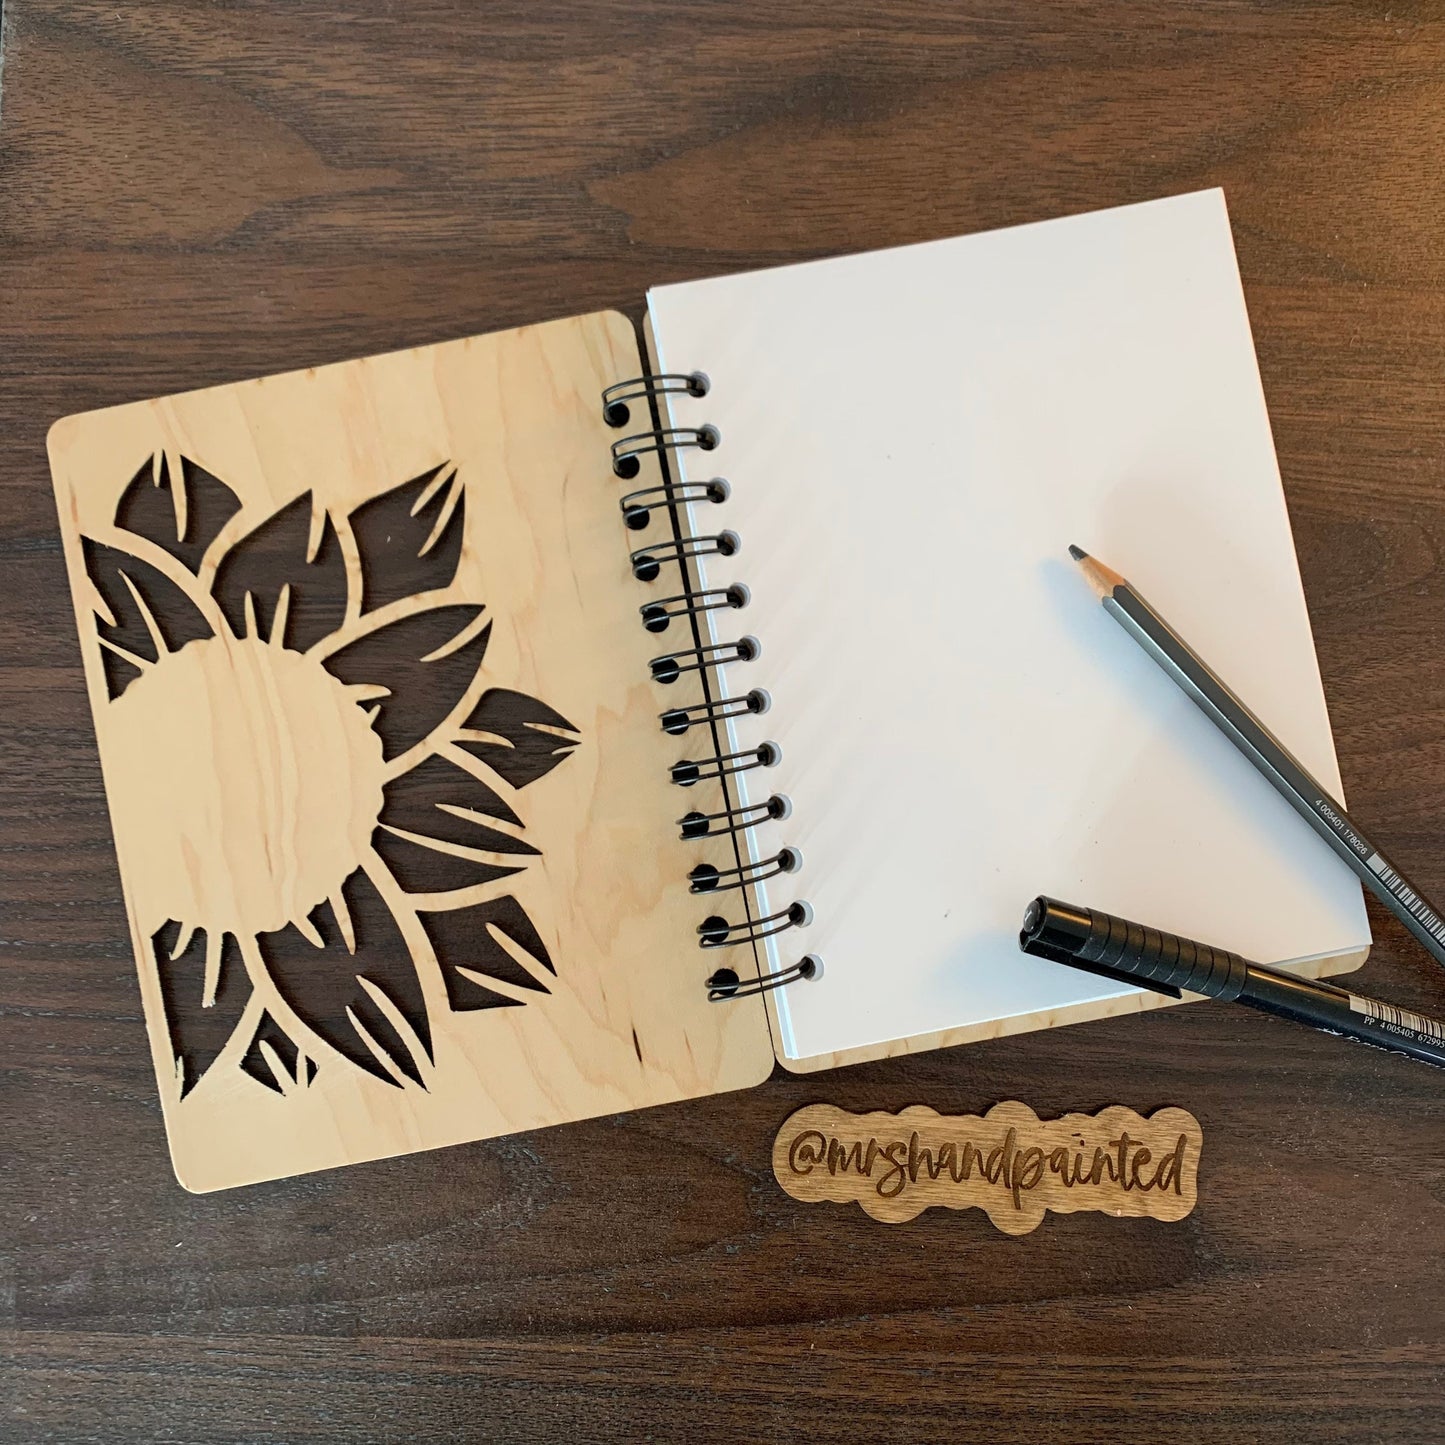 Personalized Watercolor Sketchbook, Sunflower Cutout Laser Engraved Wood, Spiral Binding with Cotton Watercolor Paper or Sketchpaper